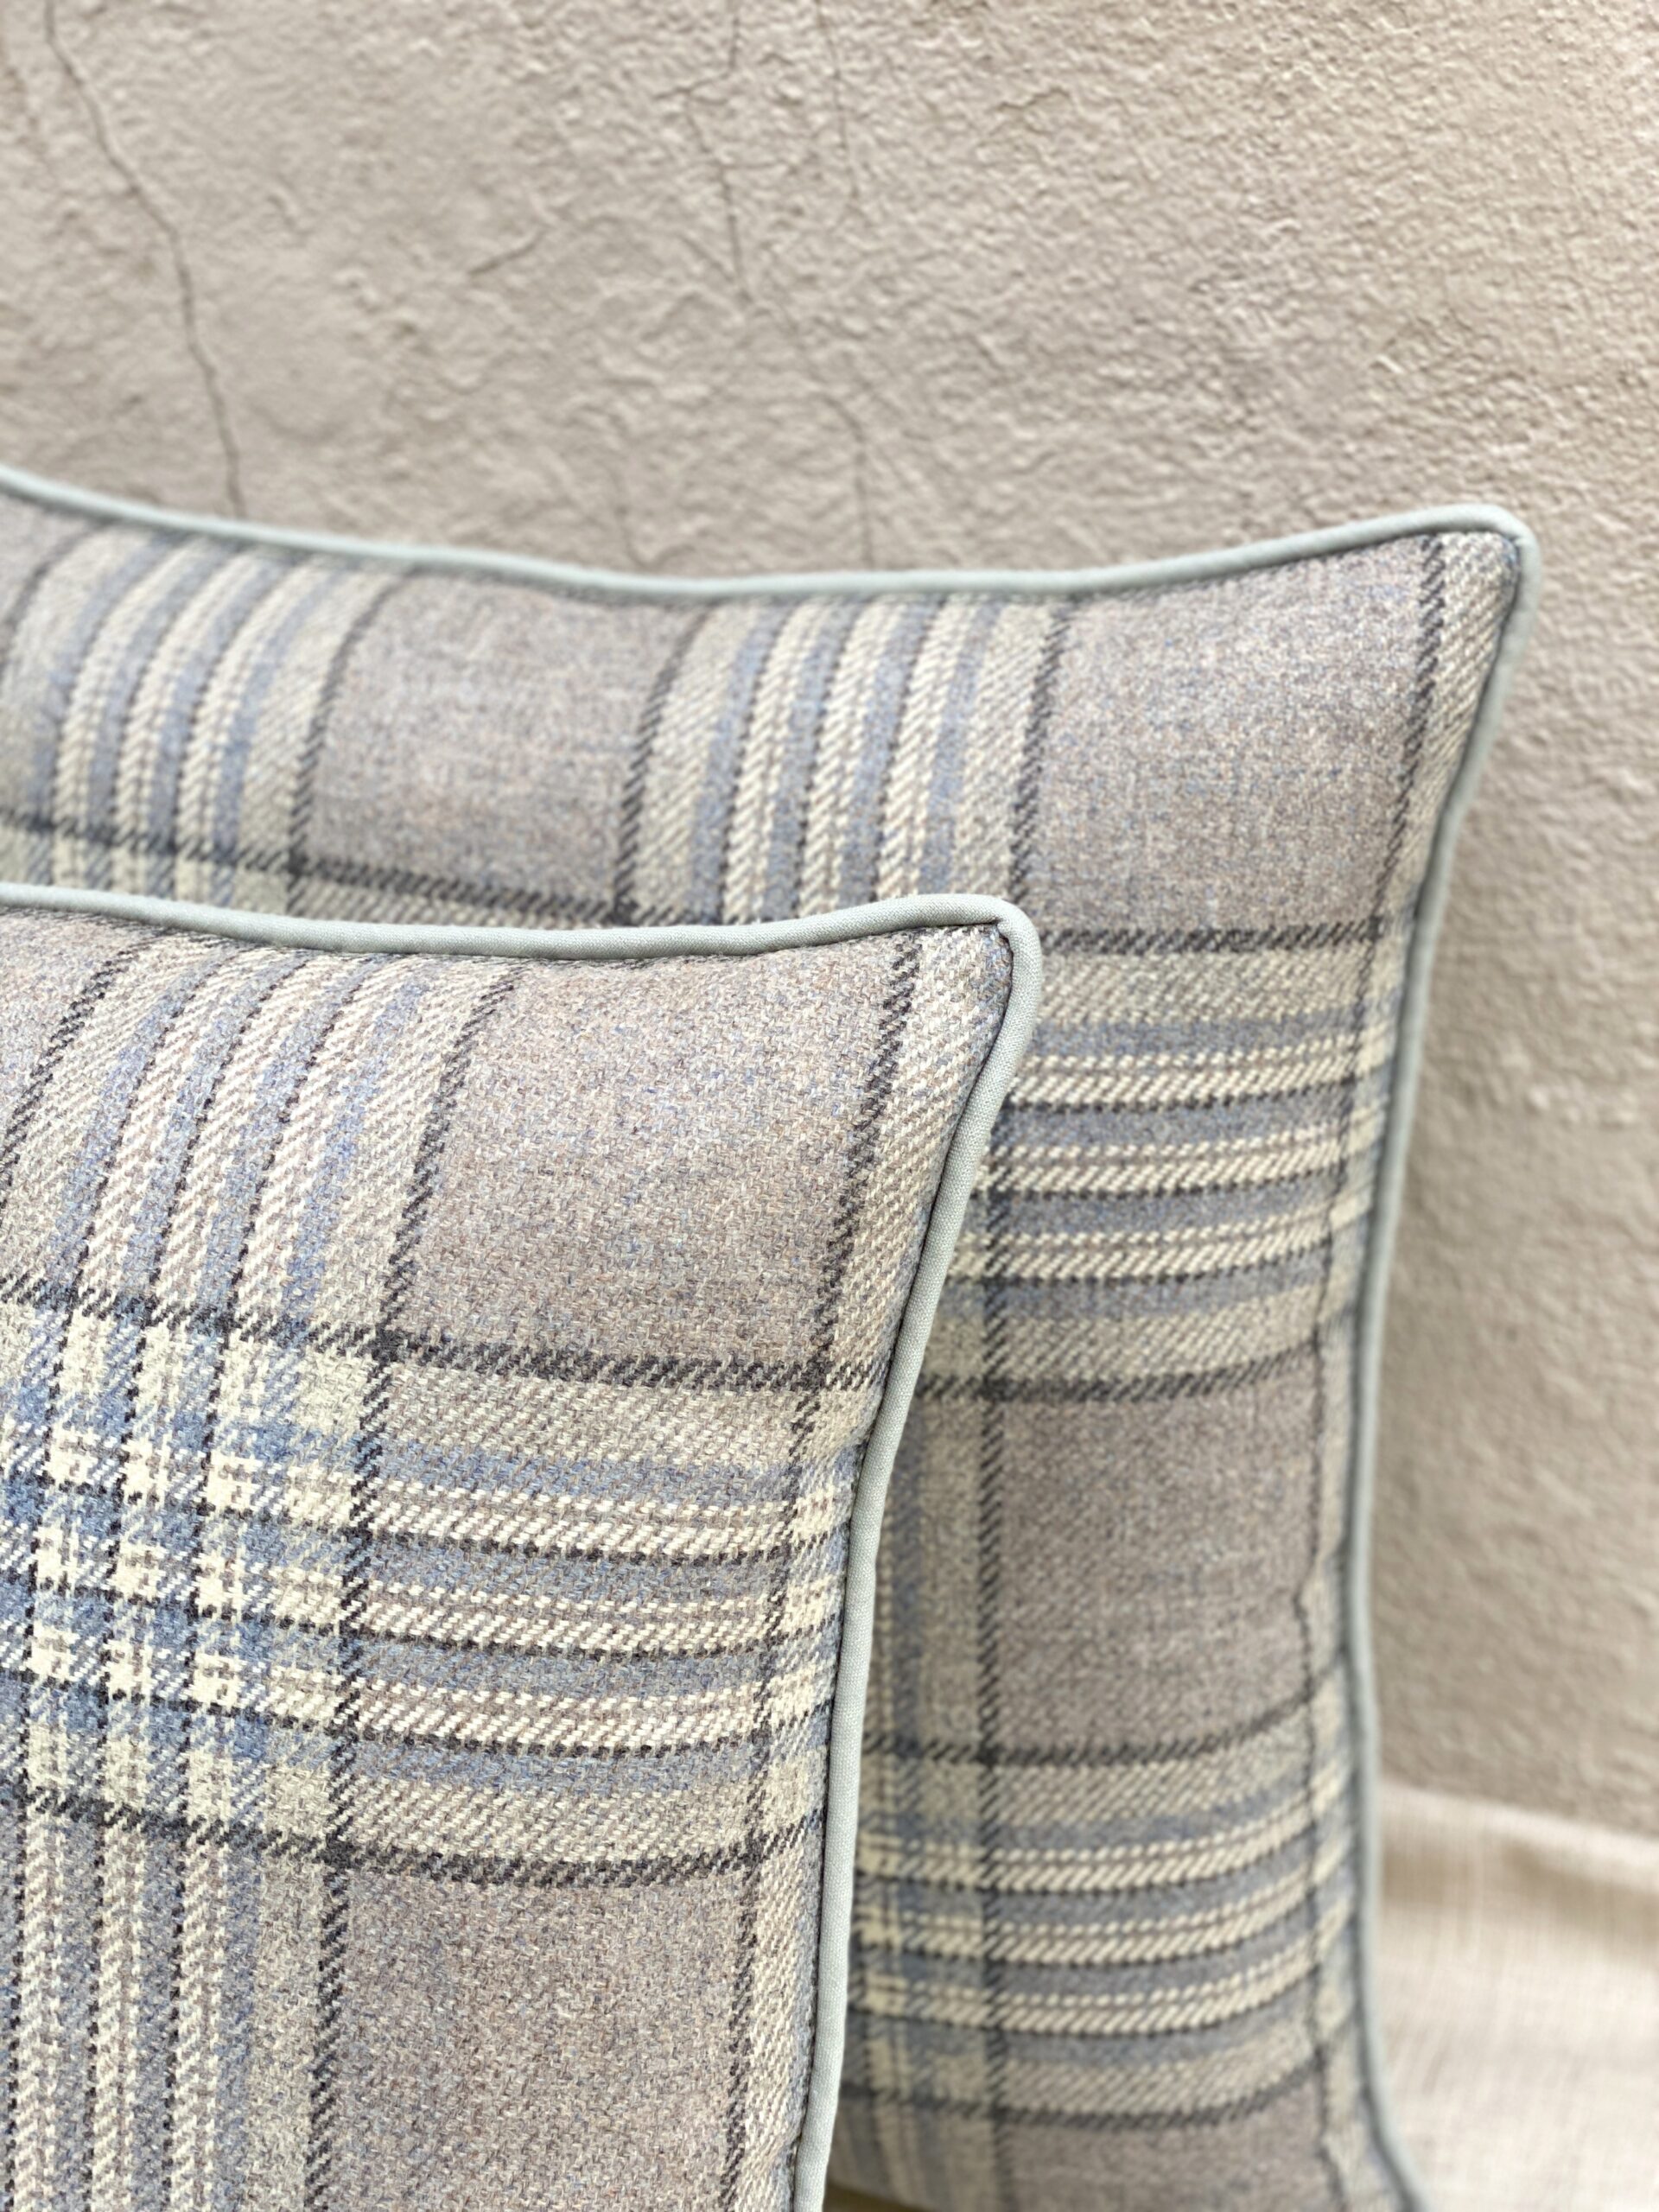 Colefax & Fowler Lowick Plaid Pillows